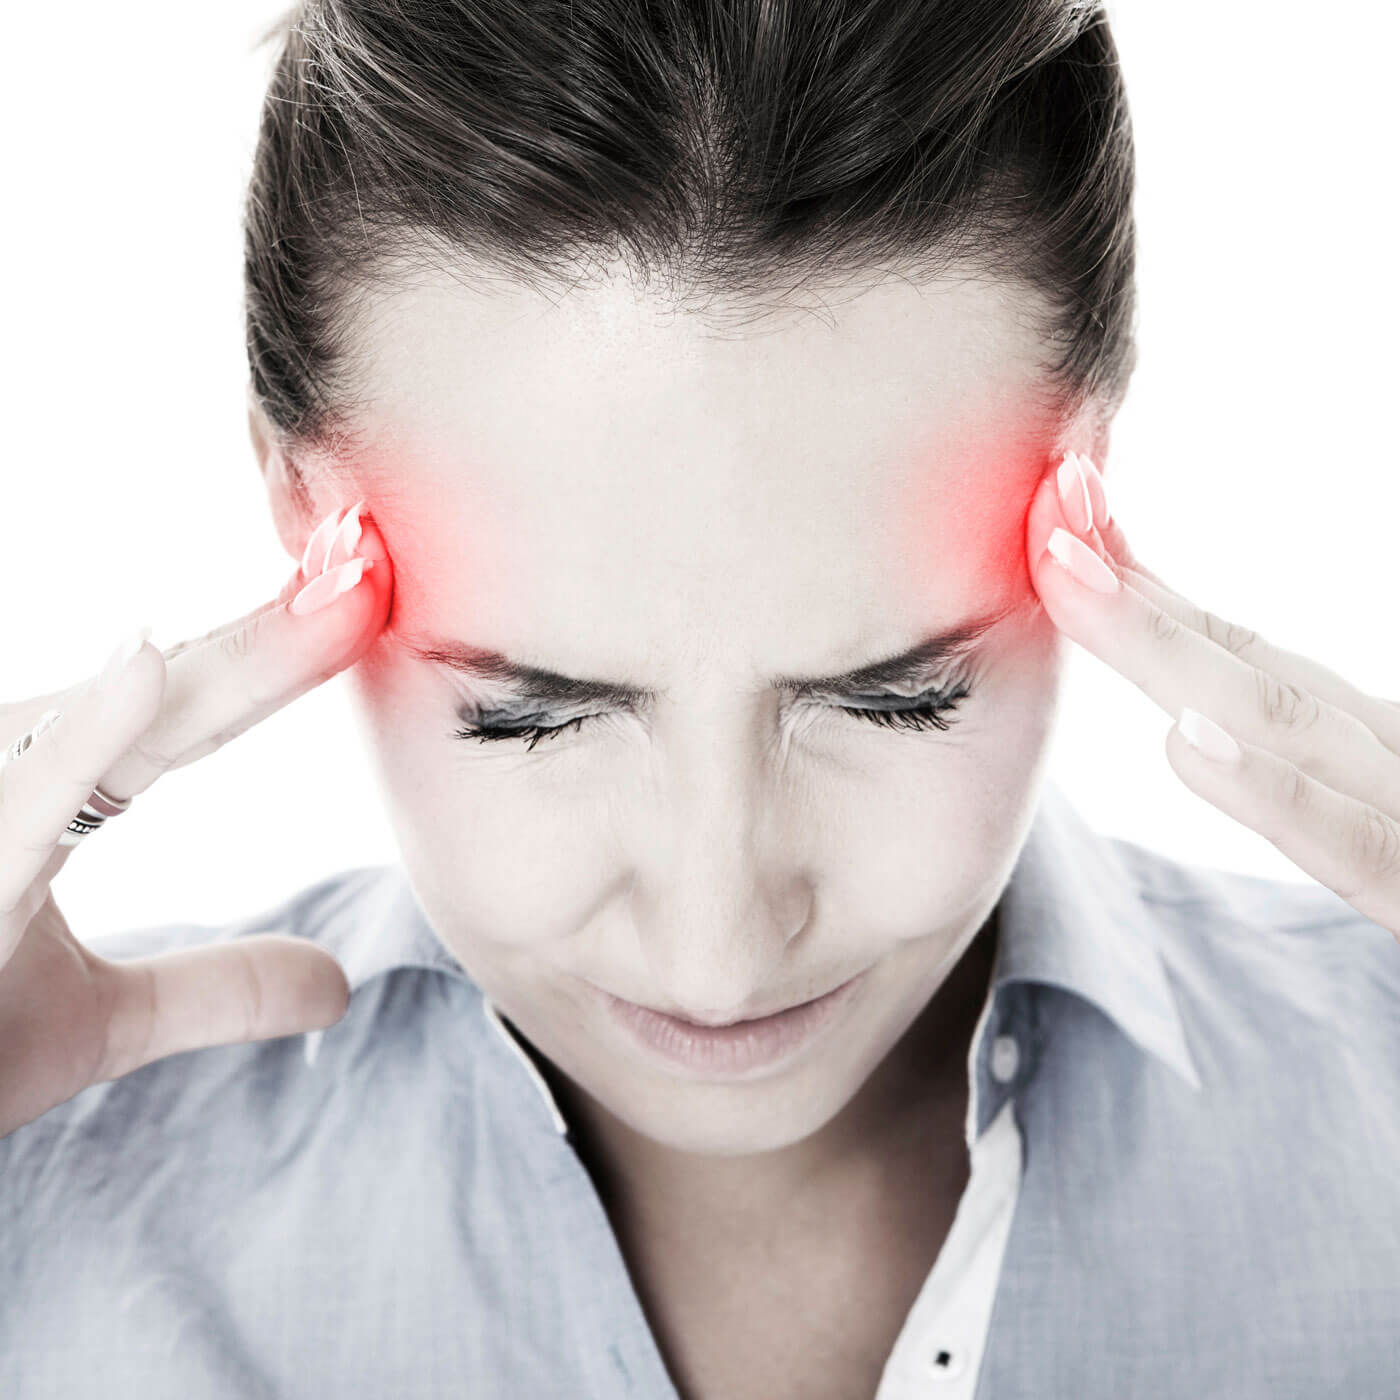 Essential Chiropractic and Healthcare Clinic - Chiropractic Conditions Headache and Migraine Treatment and Relief